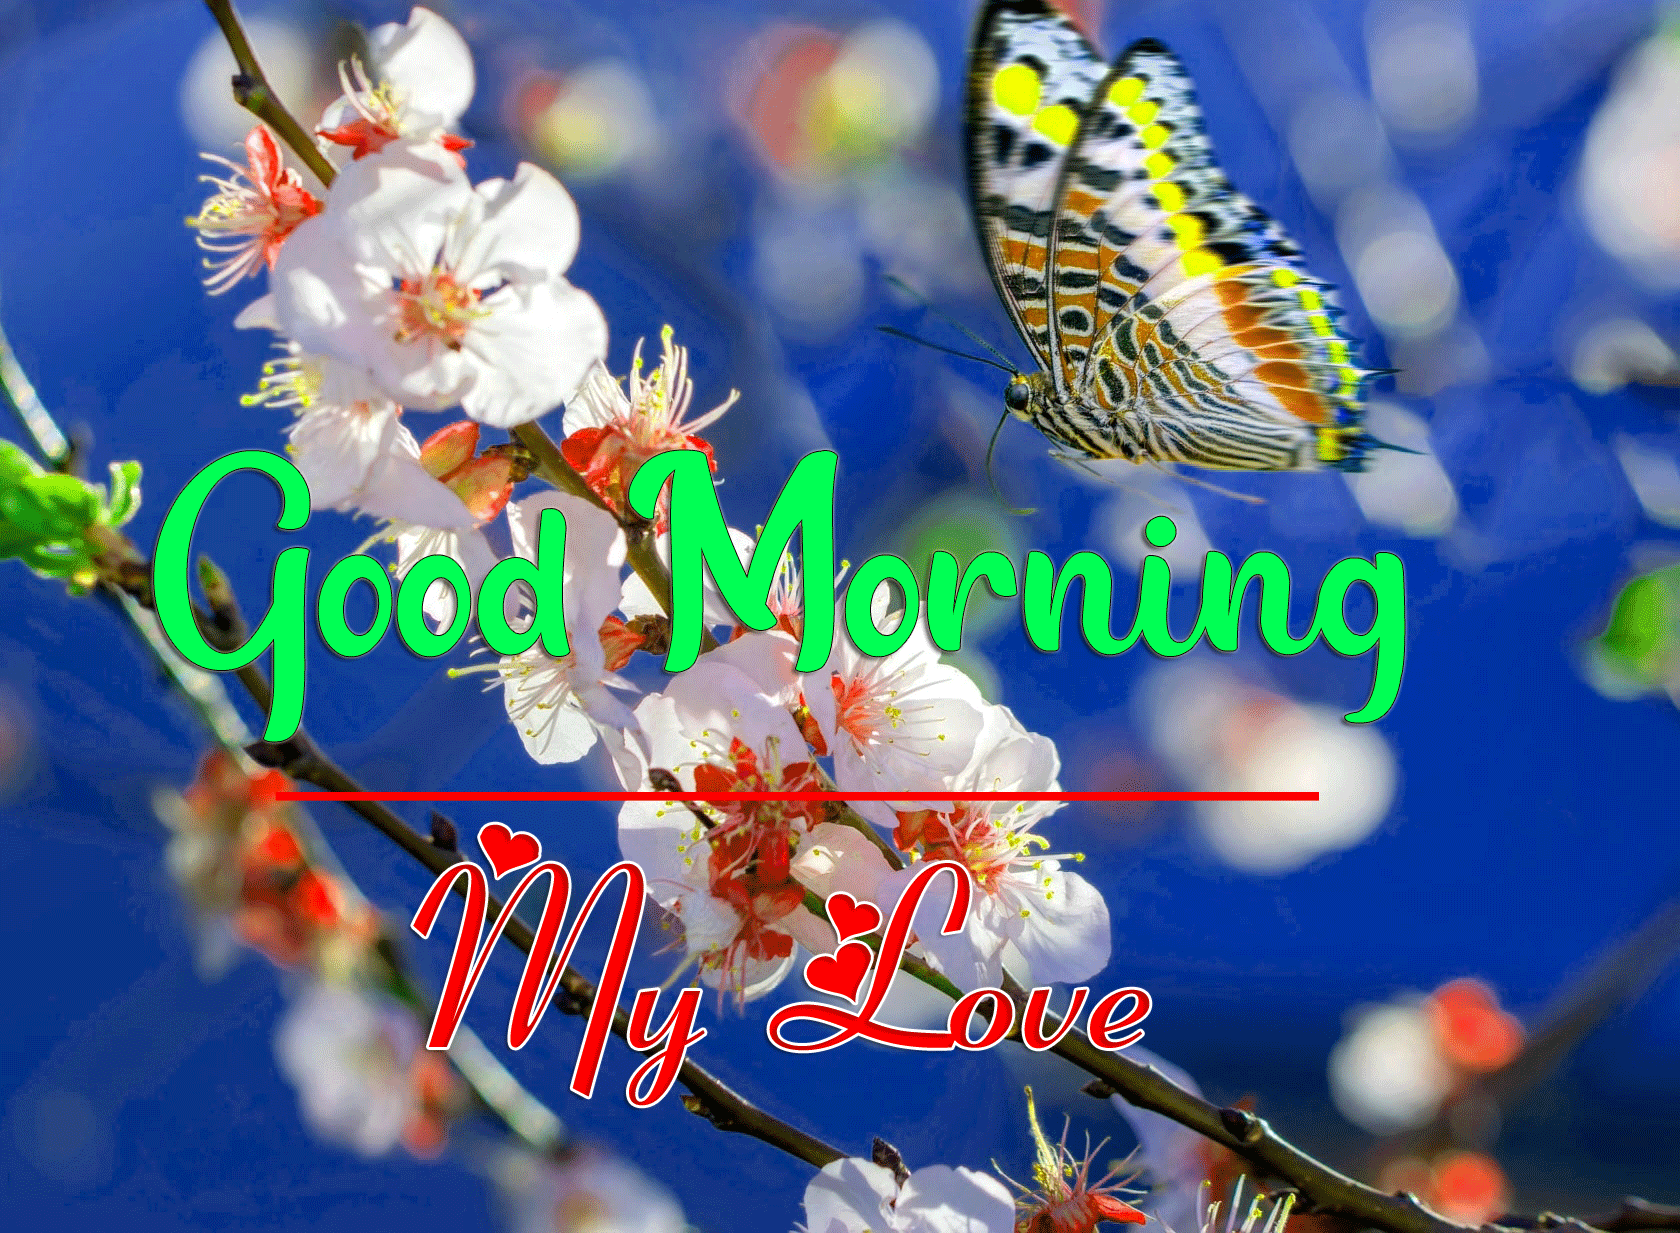 Good Morning Wishes Images HD 1080p 17